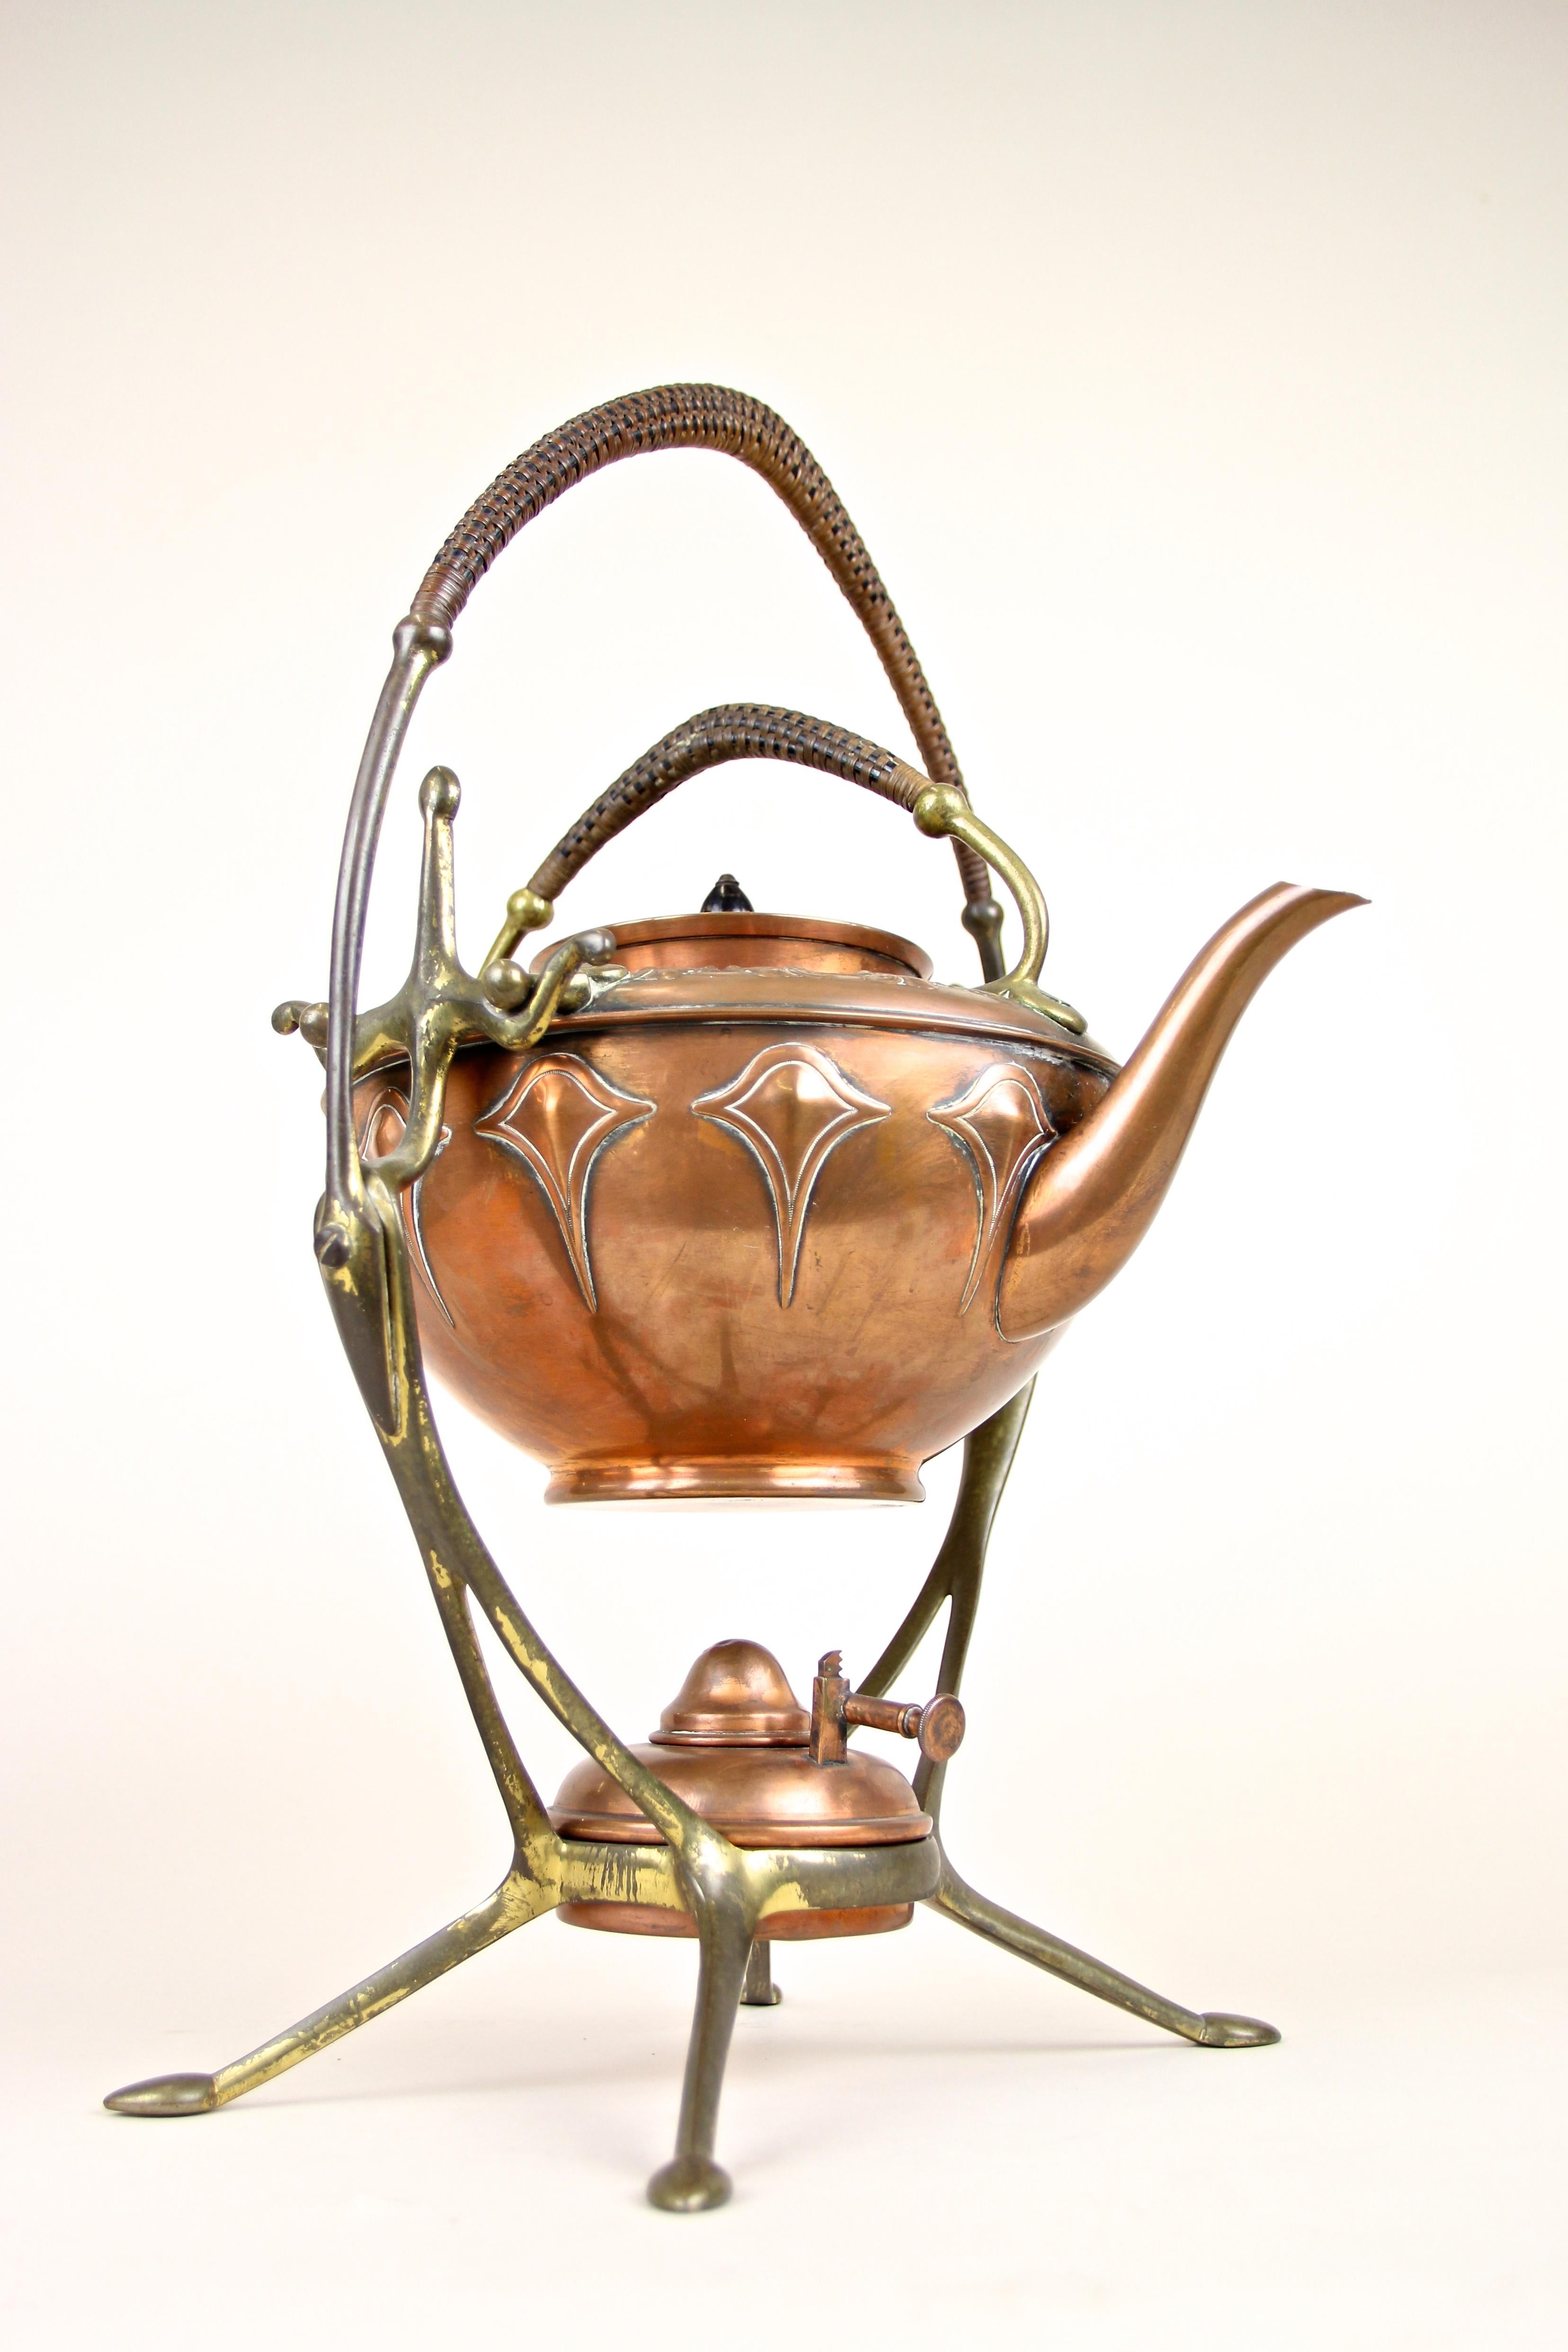 20th Century Art Deco Tea Set by WMF, Copper-Plated, Germany, circa 1920 8